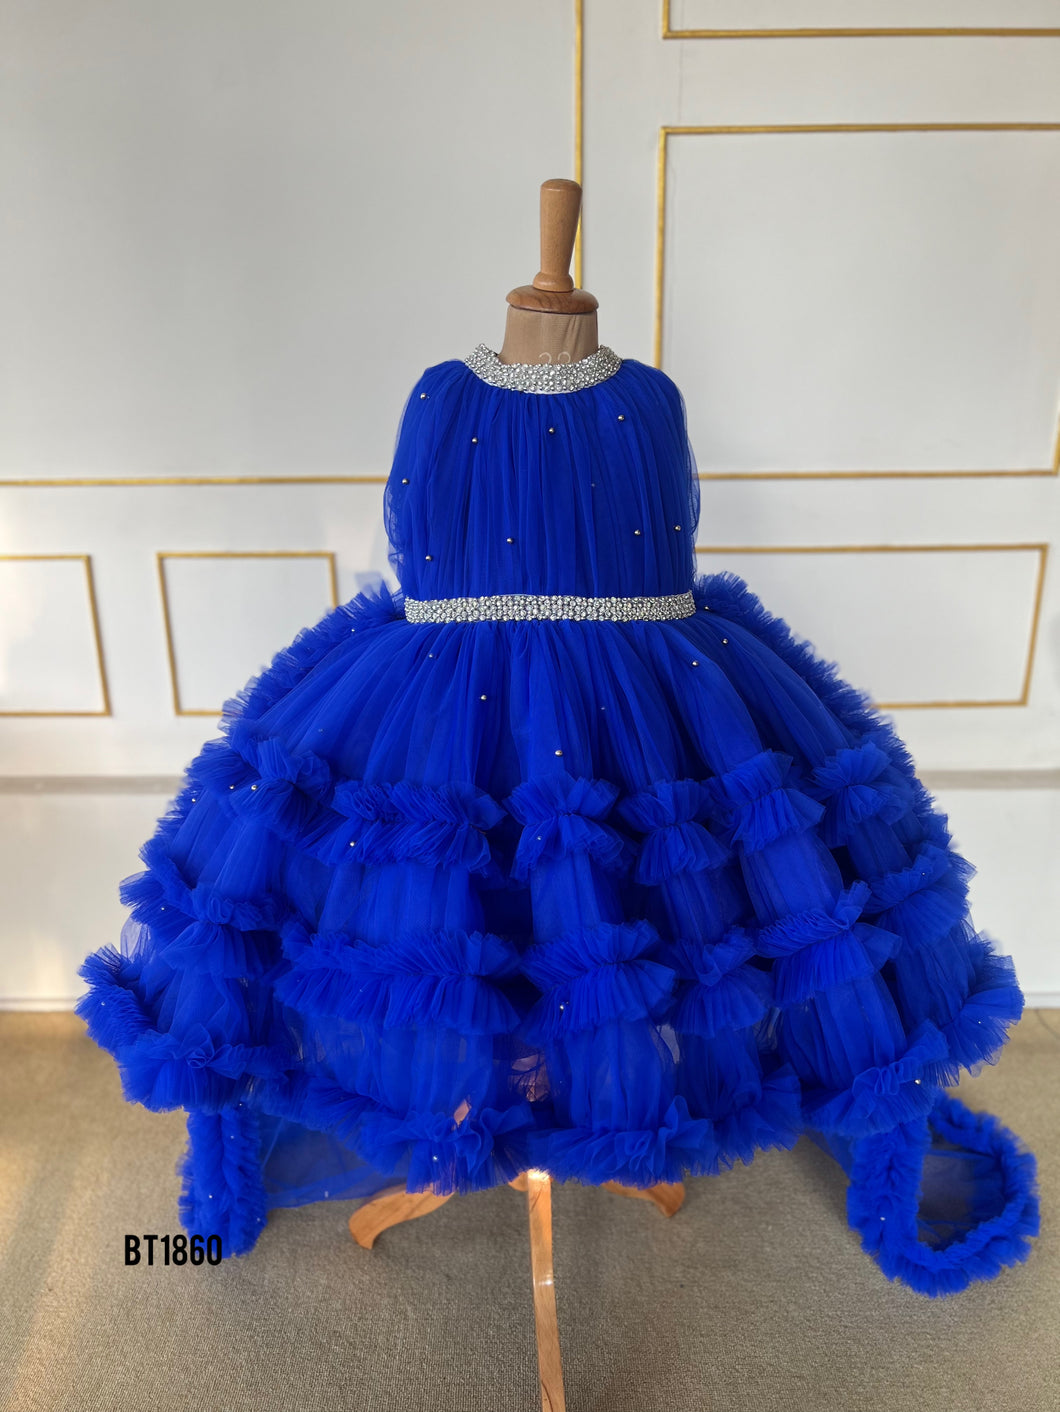 BT1860 Celebrate in Style: Luxe Royal Blue Party Dress